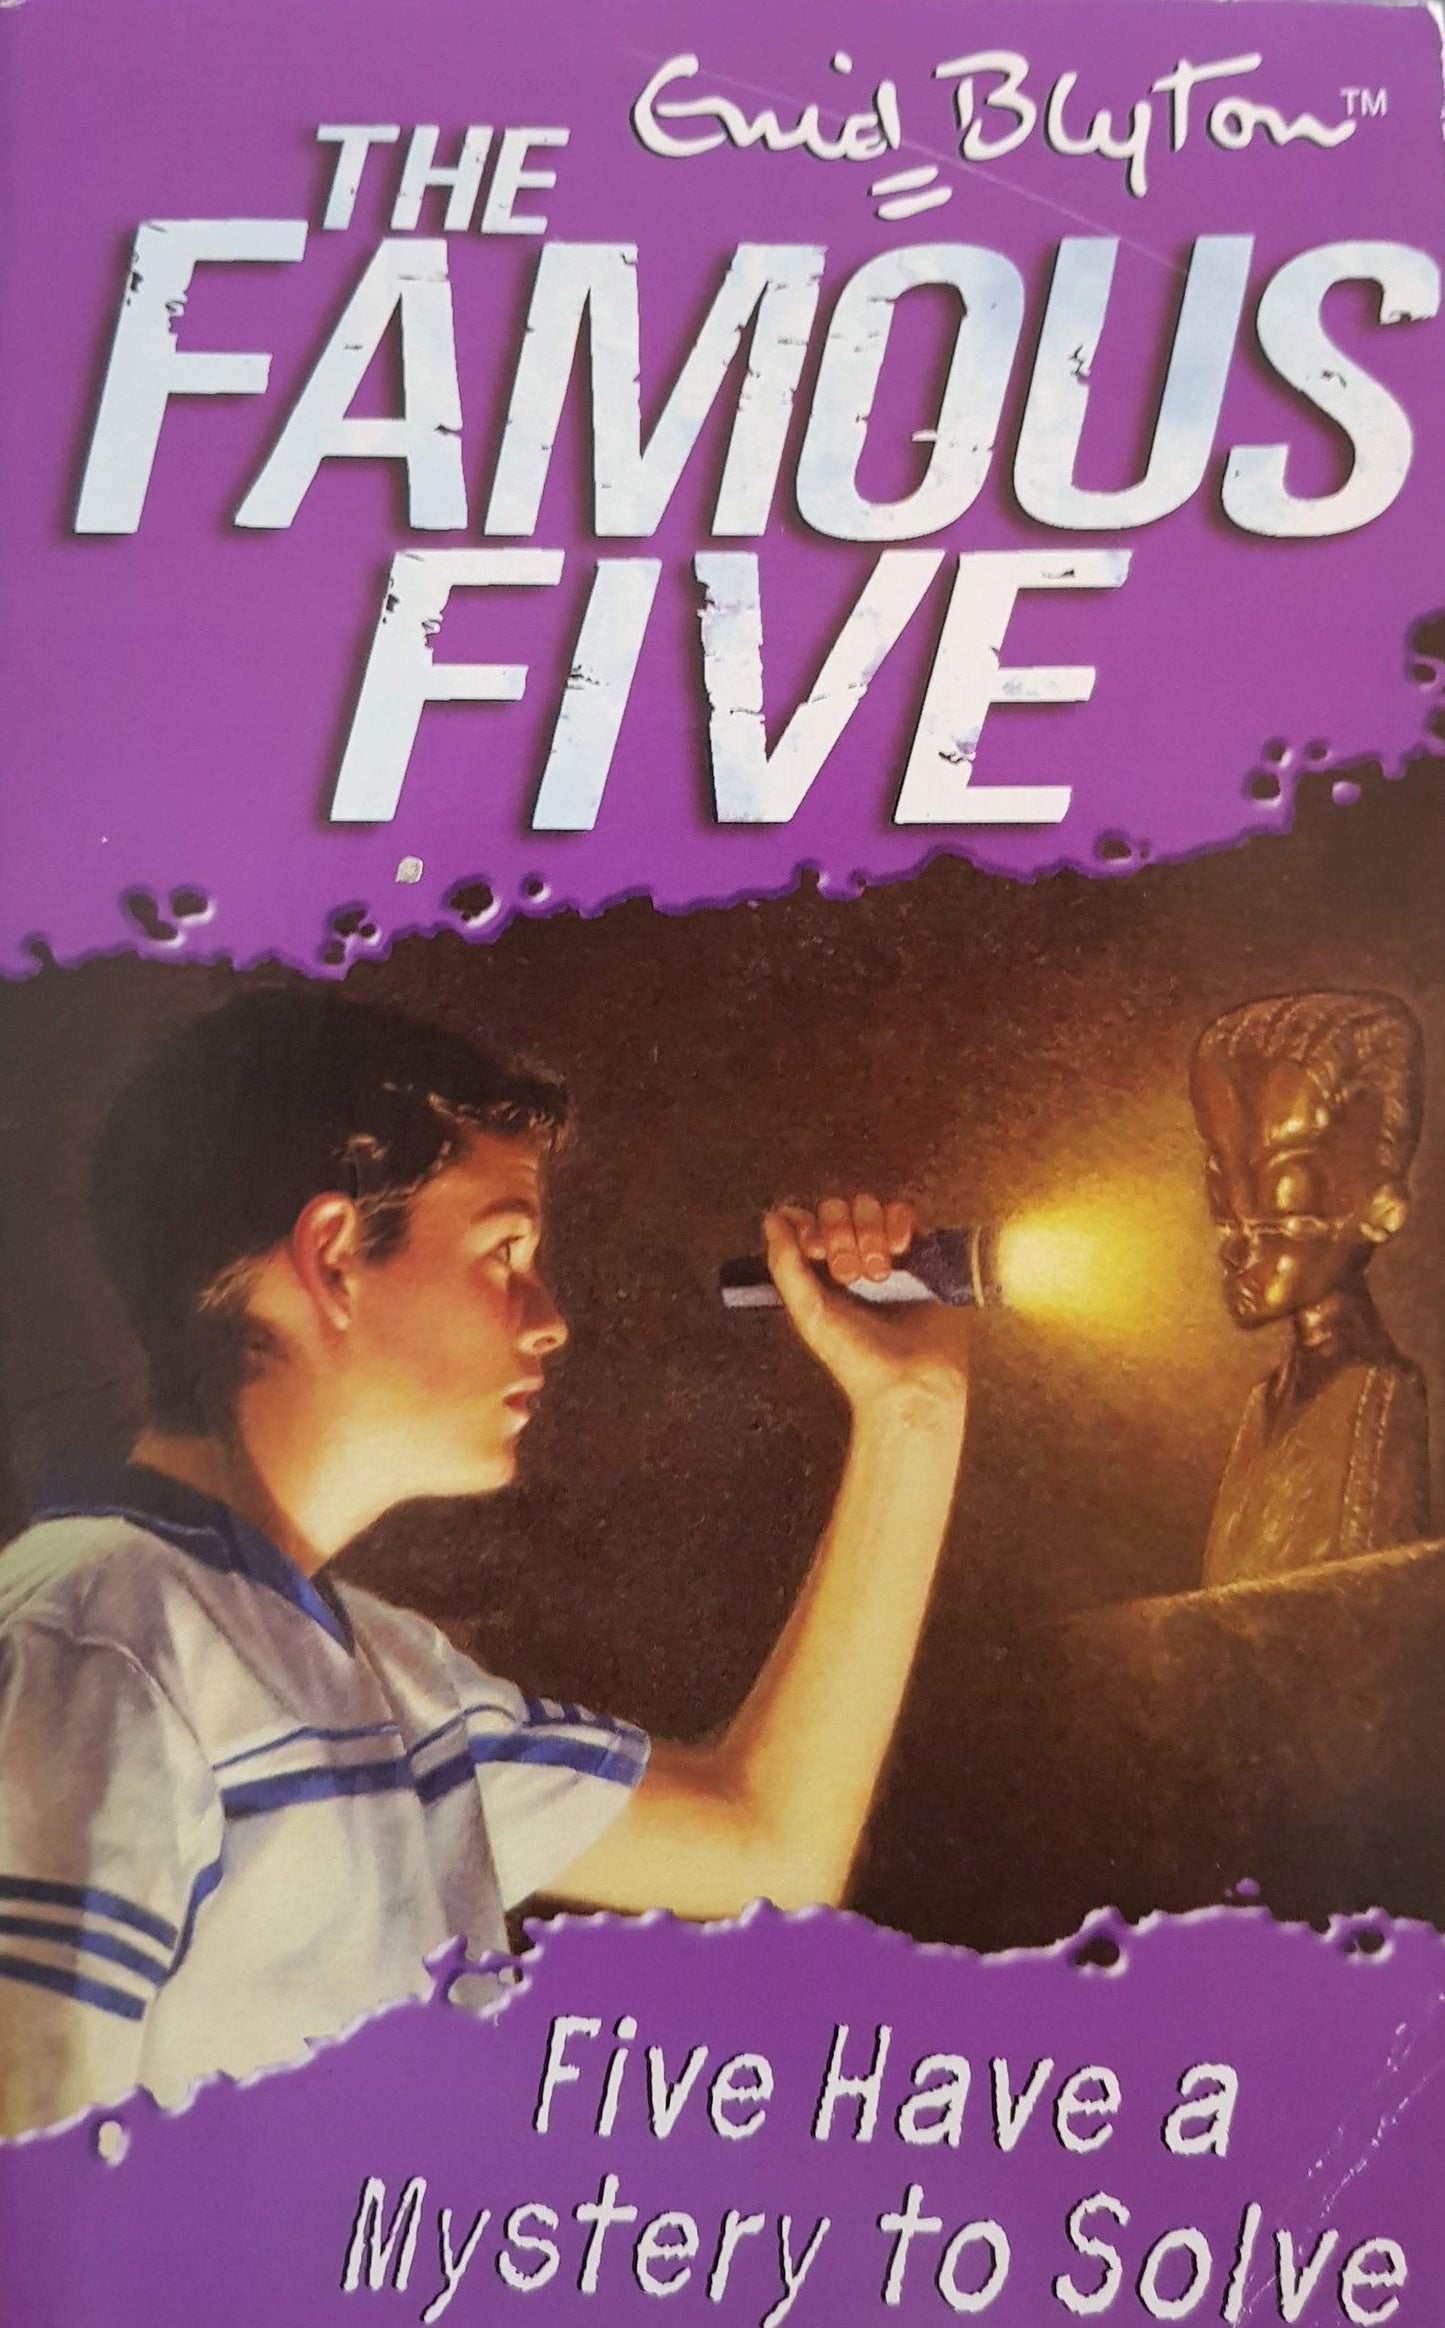 The Famous Five - Five have a mystery to solve Very Good Enid Blyton  (6089429188793)